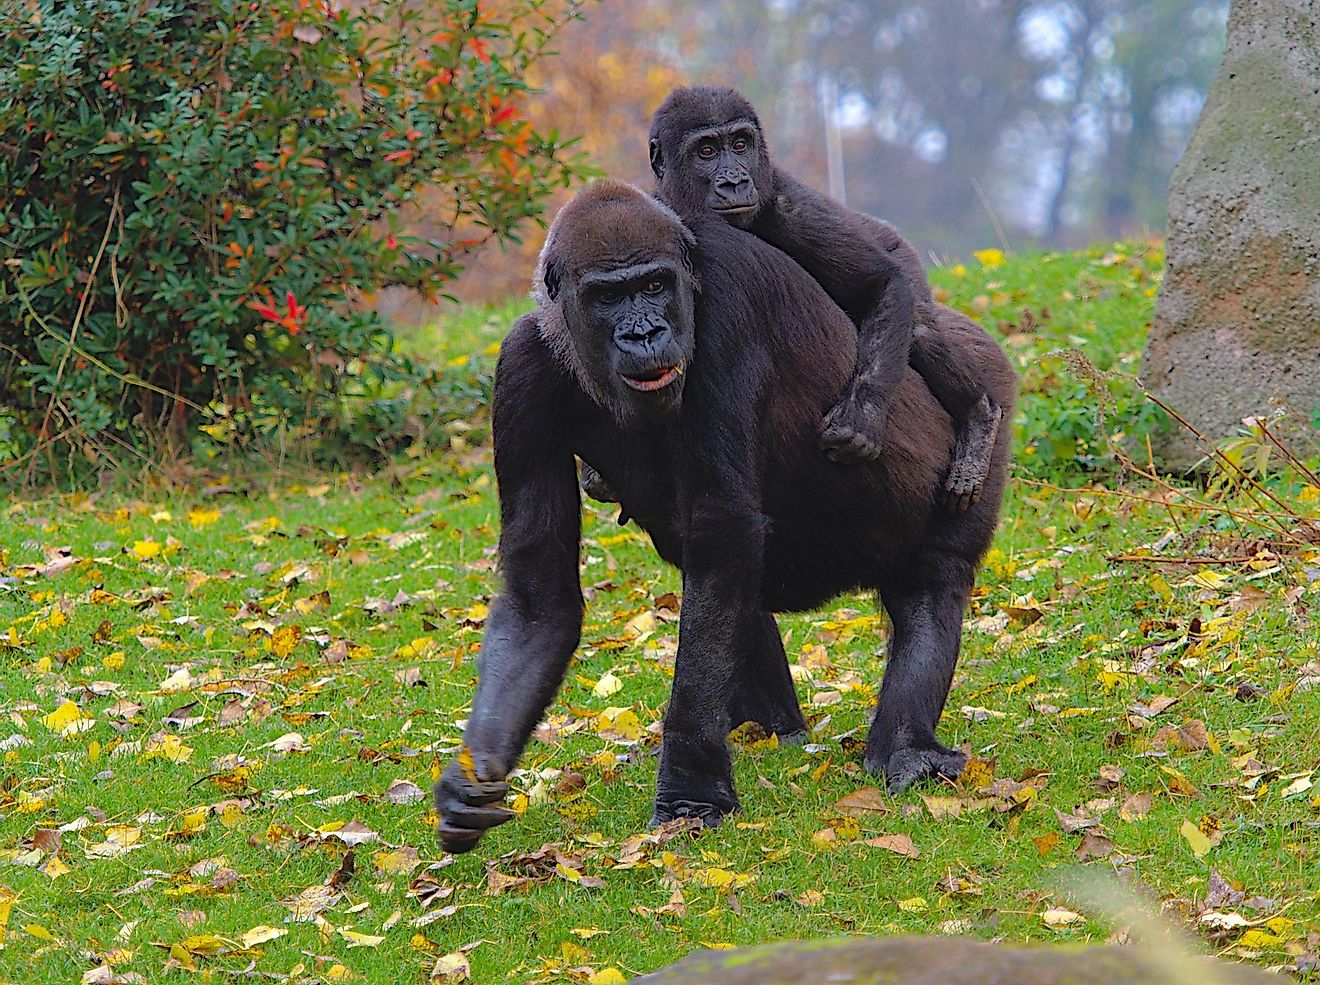 A gorilla walking with its offspring on the back.